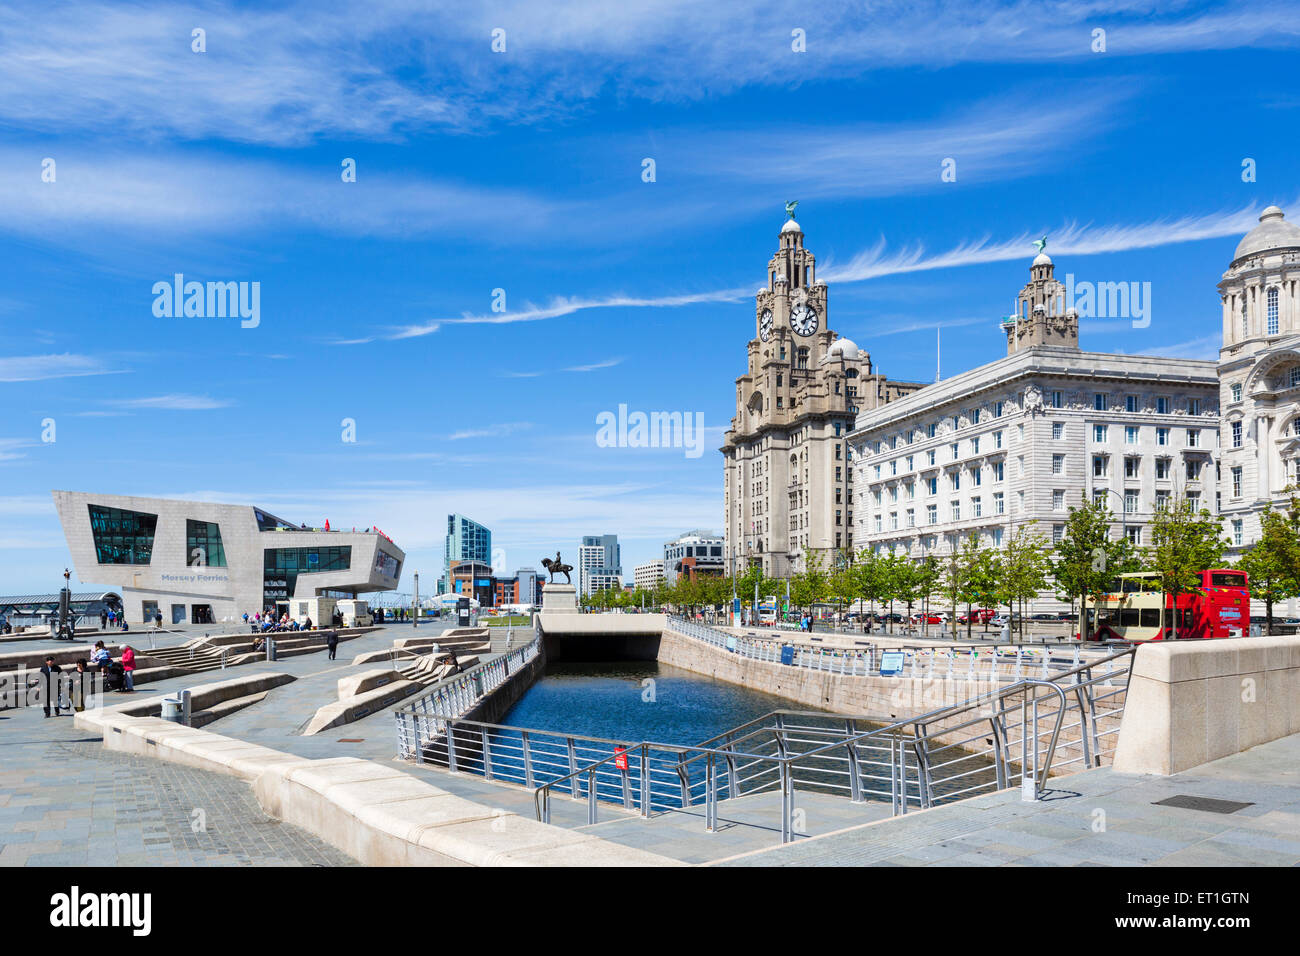 The Royal Liver and Cunard Buildings behind the Liverpool Canal Link, Pier Head, Liverpool, Merseyside, England, UK Stock Photo